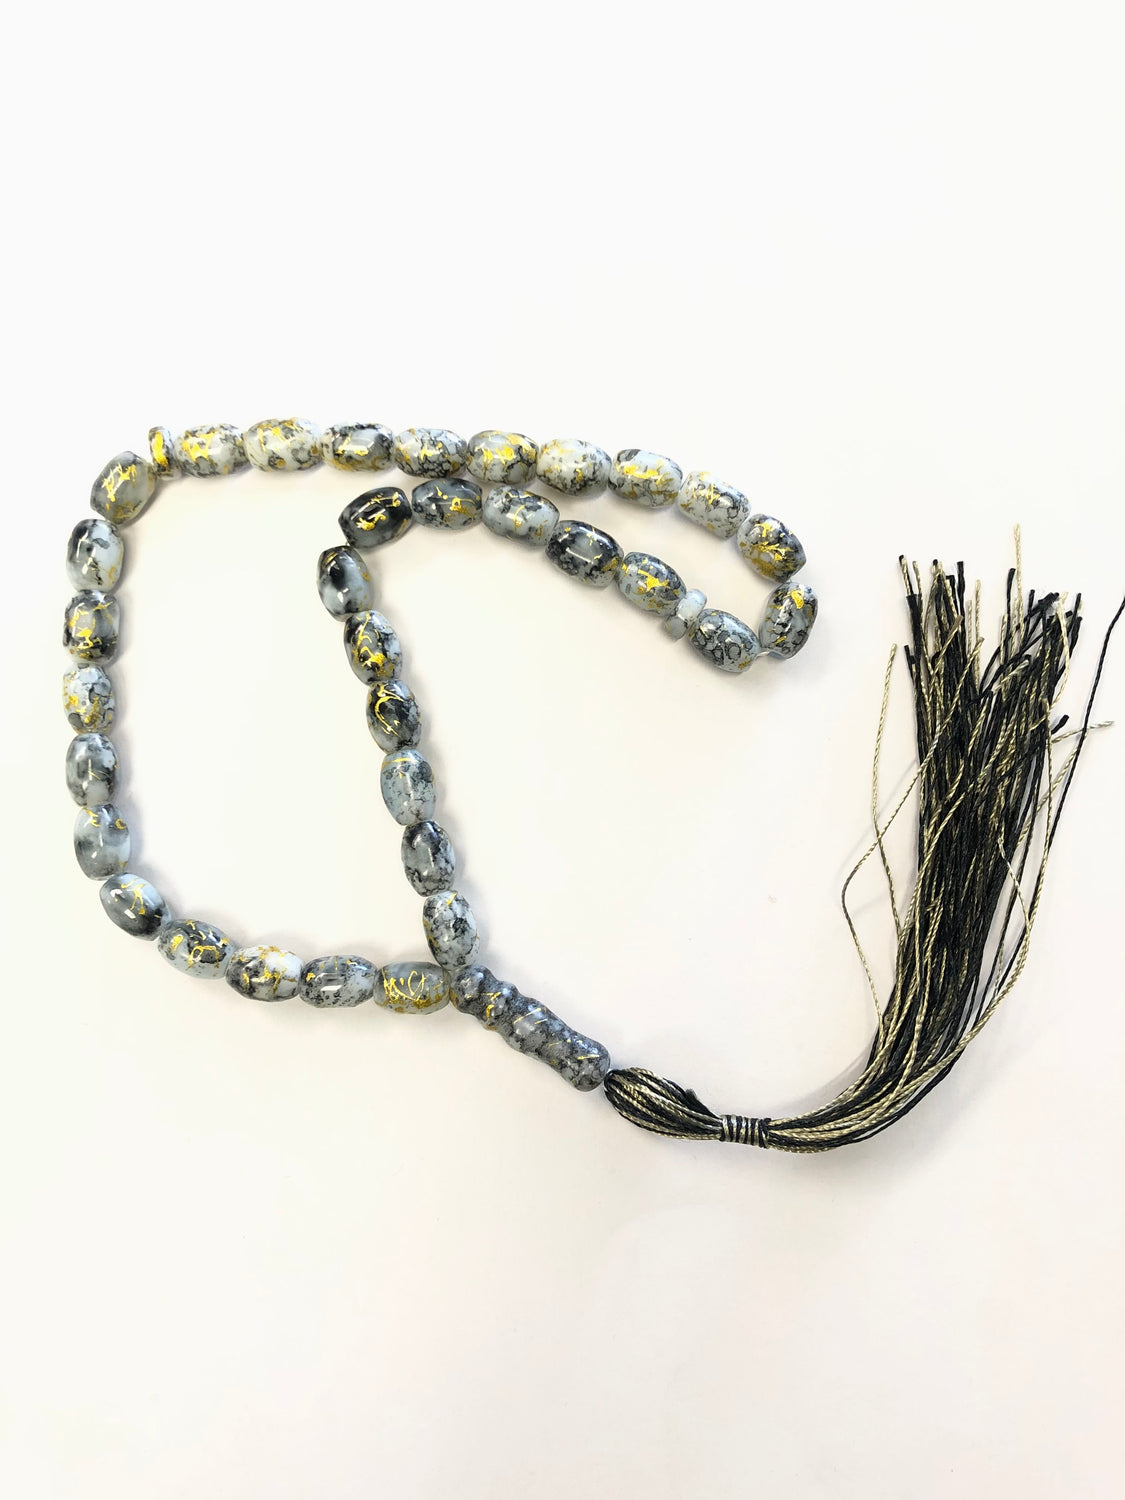 gray marbled and gold tasbeeh with 33 beads